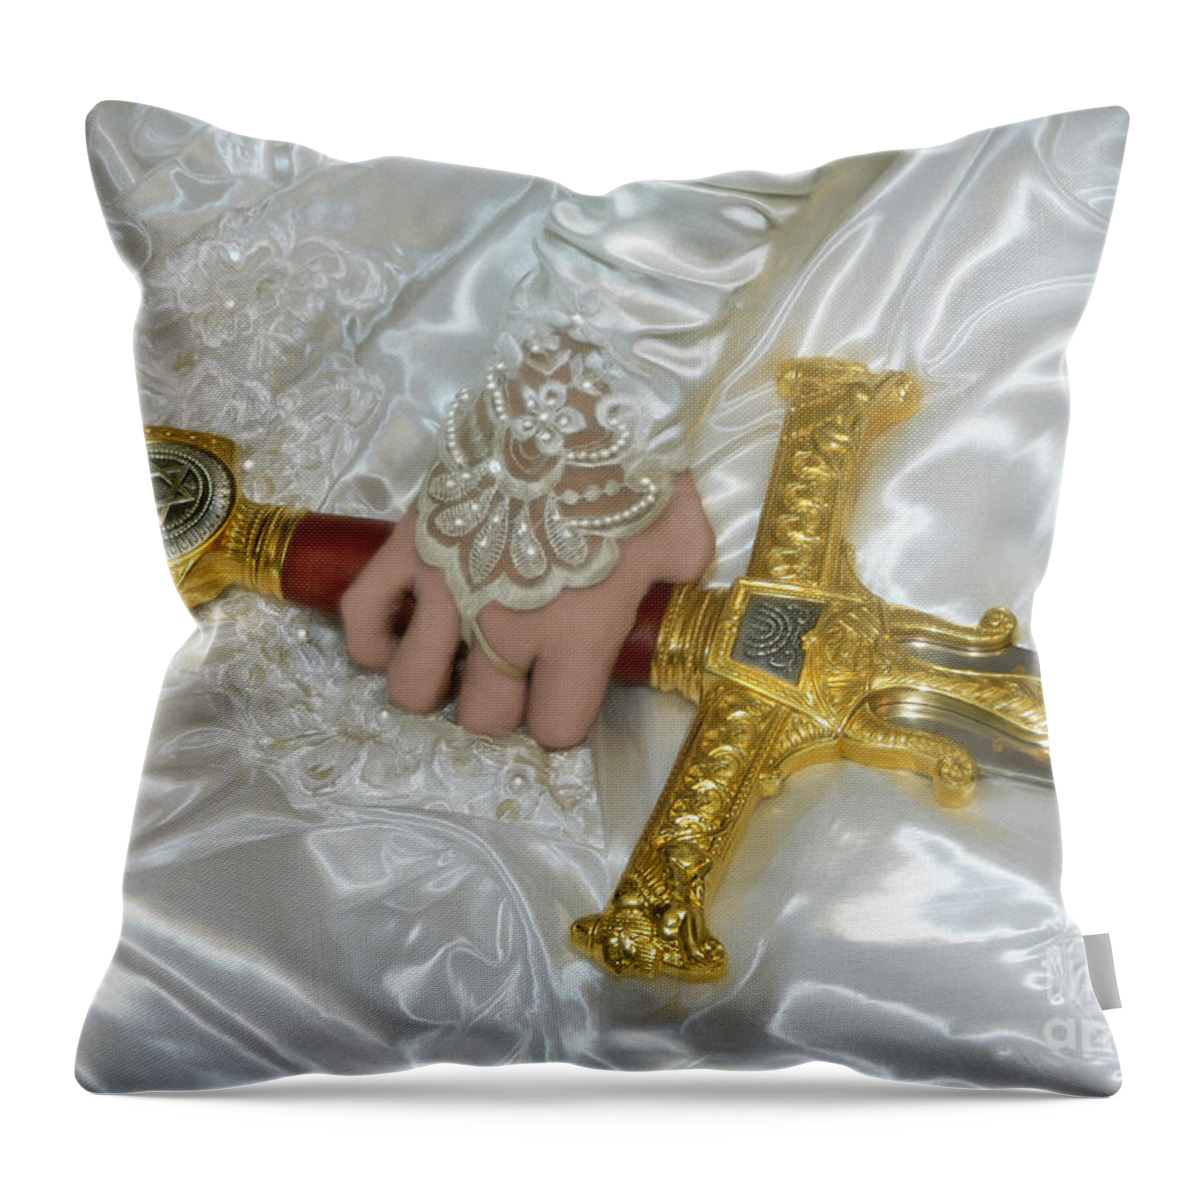 Bride Of Christ Art Throw Pillow featuring the photograph Sword In Hand by Constance Woods